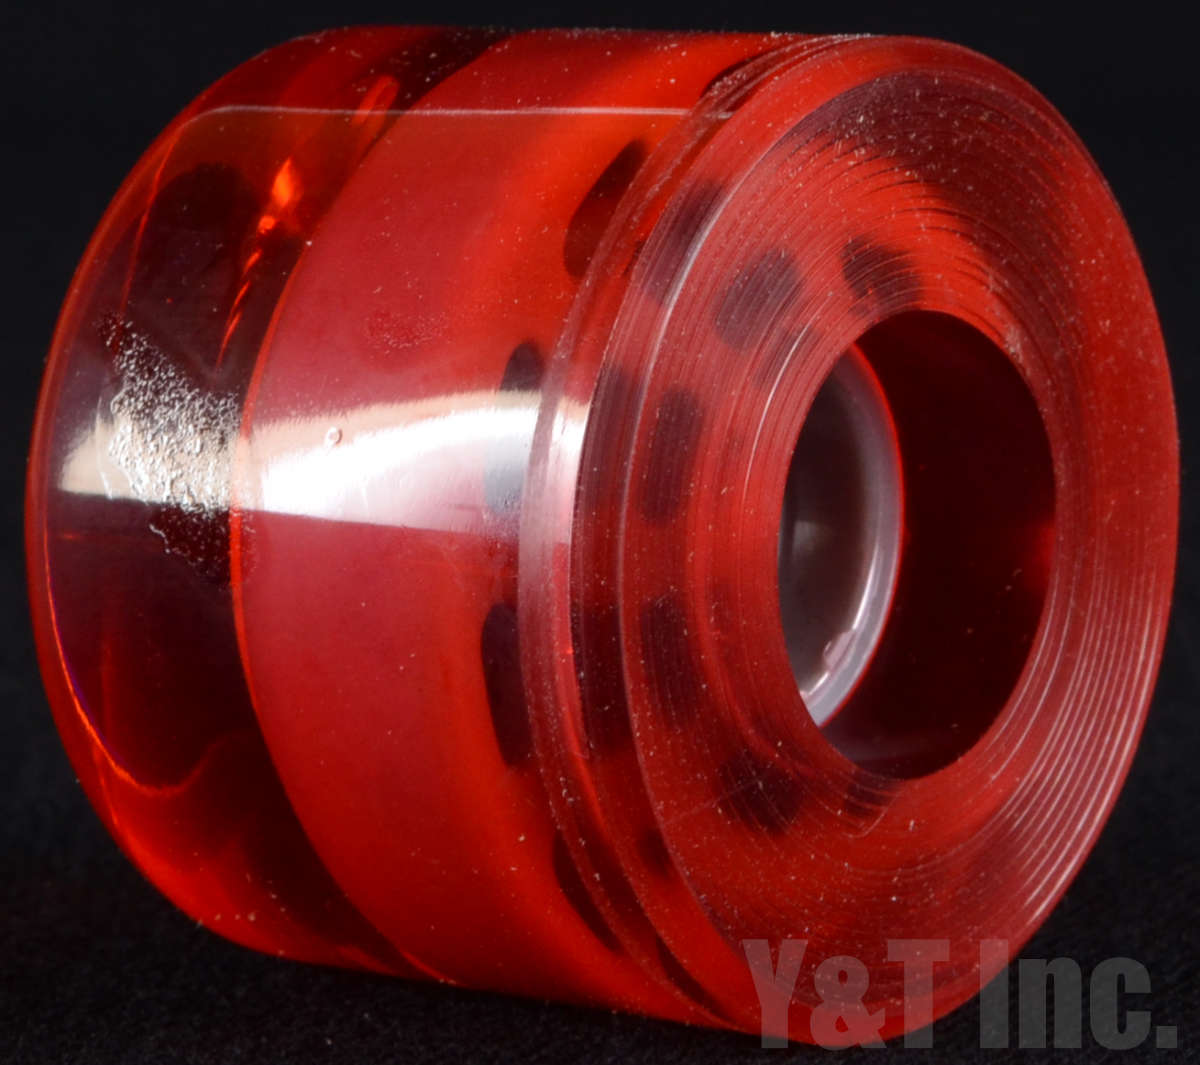 BLANK CRUISER 58mm 78a CLEAR RED 1